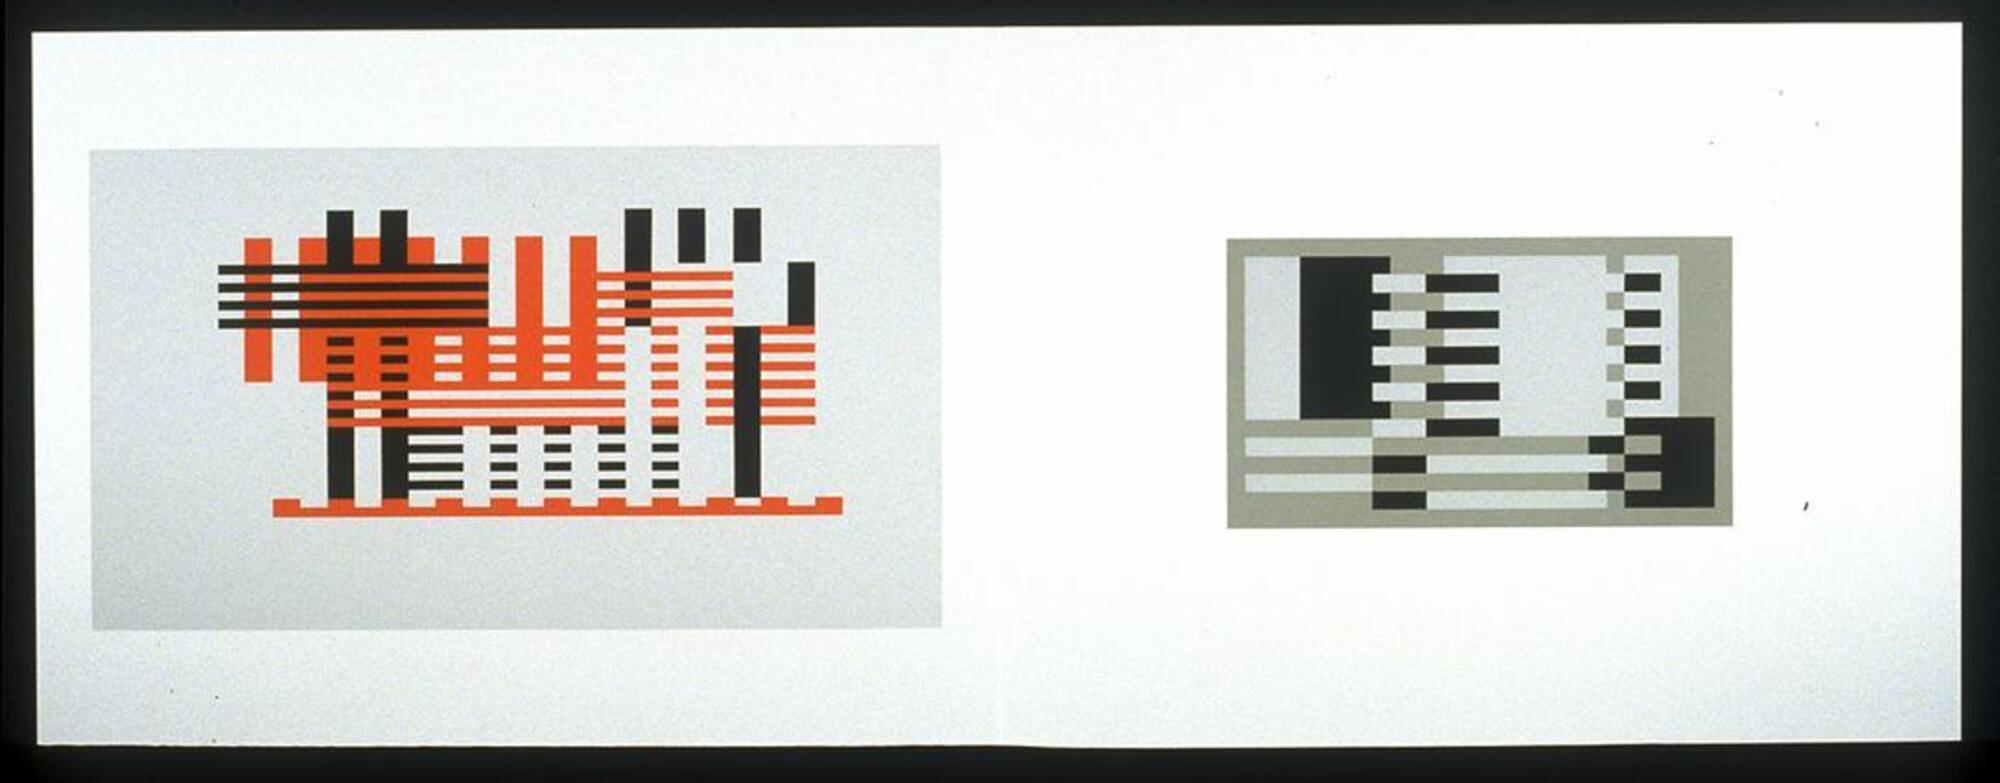 On a long white horizontal piece of paper are two rectangles, the one on the left is larger and the on the right, smaller. On the left rectangle are orange, white and black vertical and horizontal stripes. On the right rectangle there are black, white and grey stripes. 